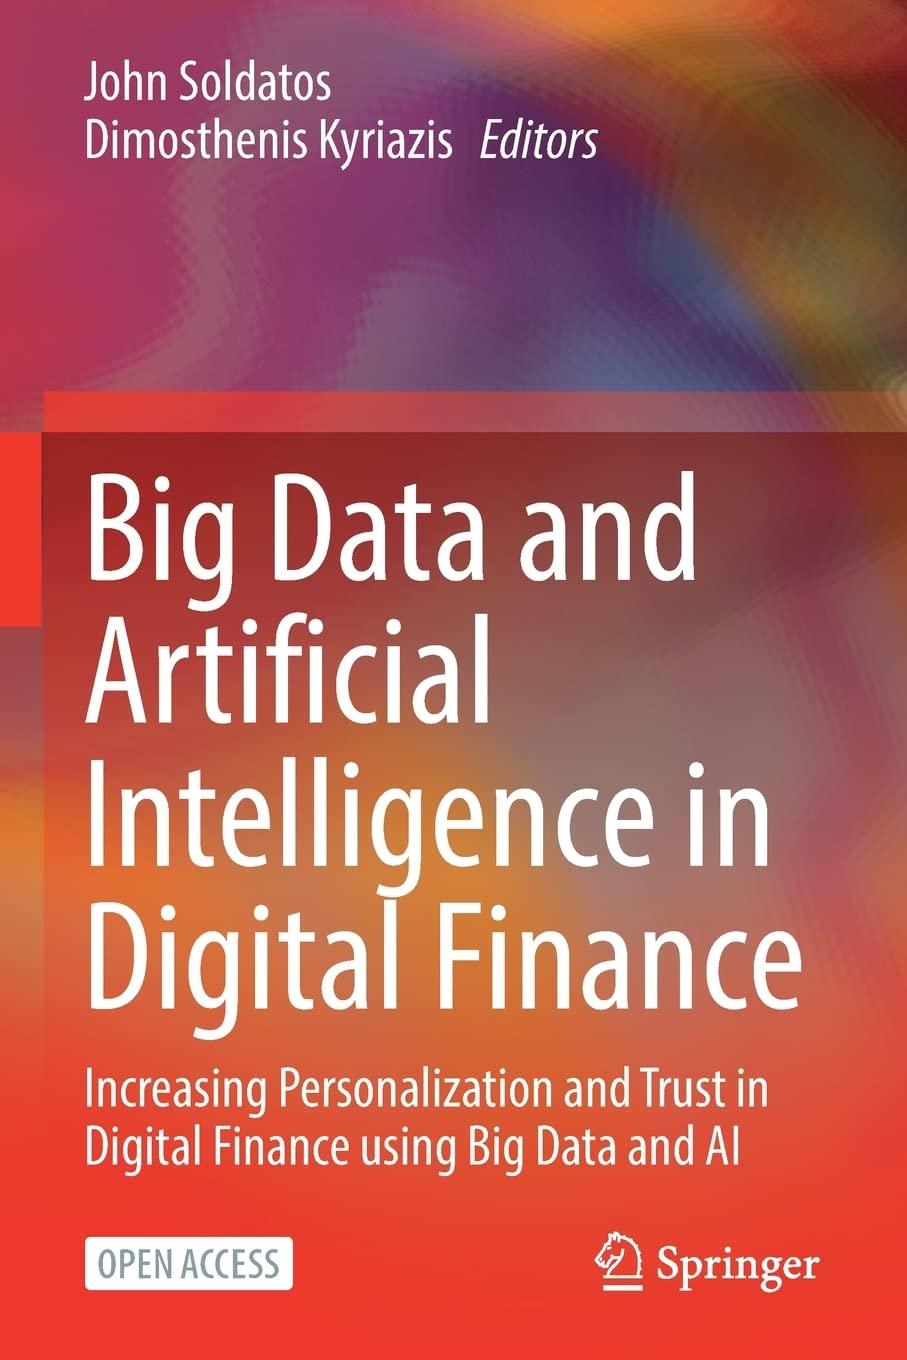 big data and artificial intelligence in digital finance  increasing personalization and trust in digital